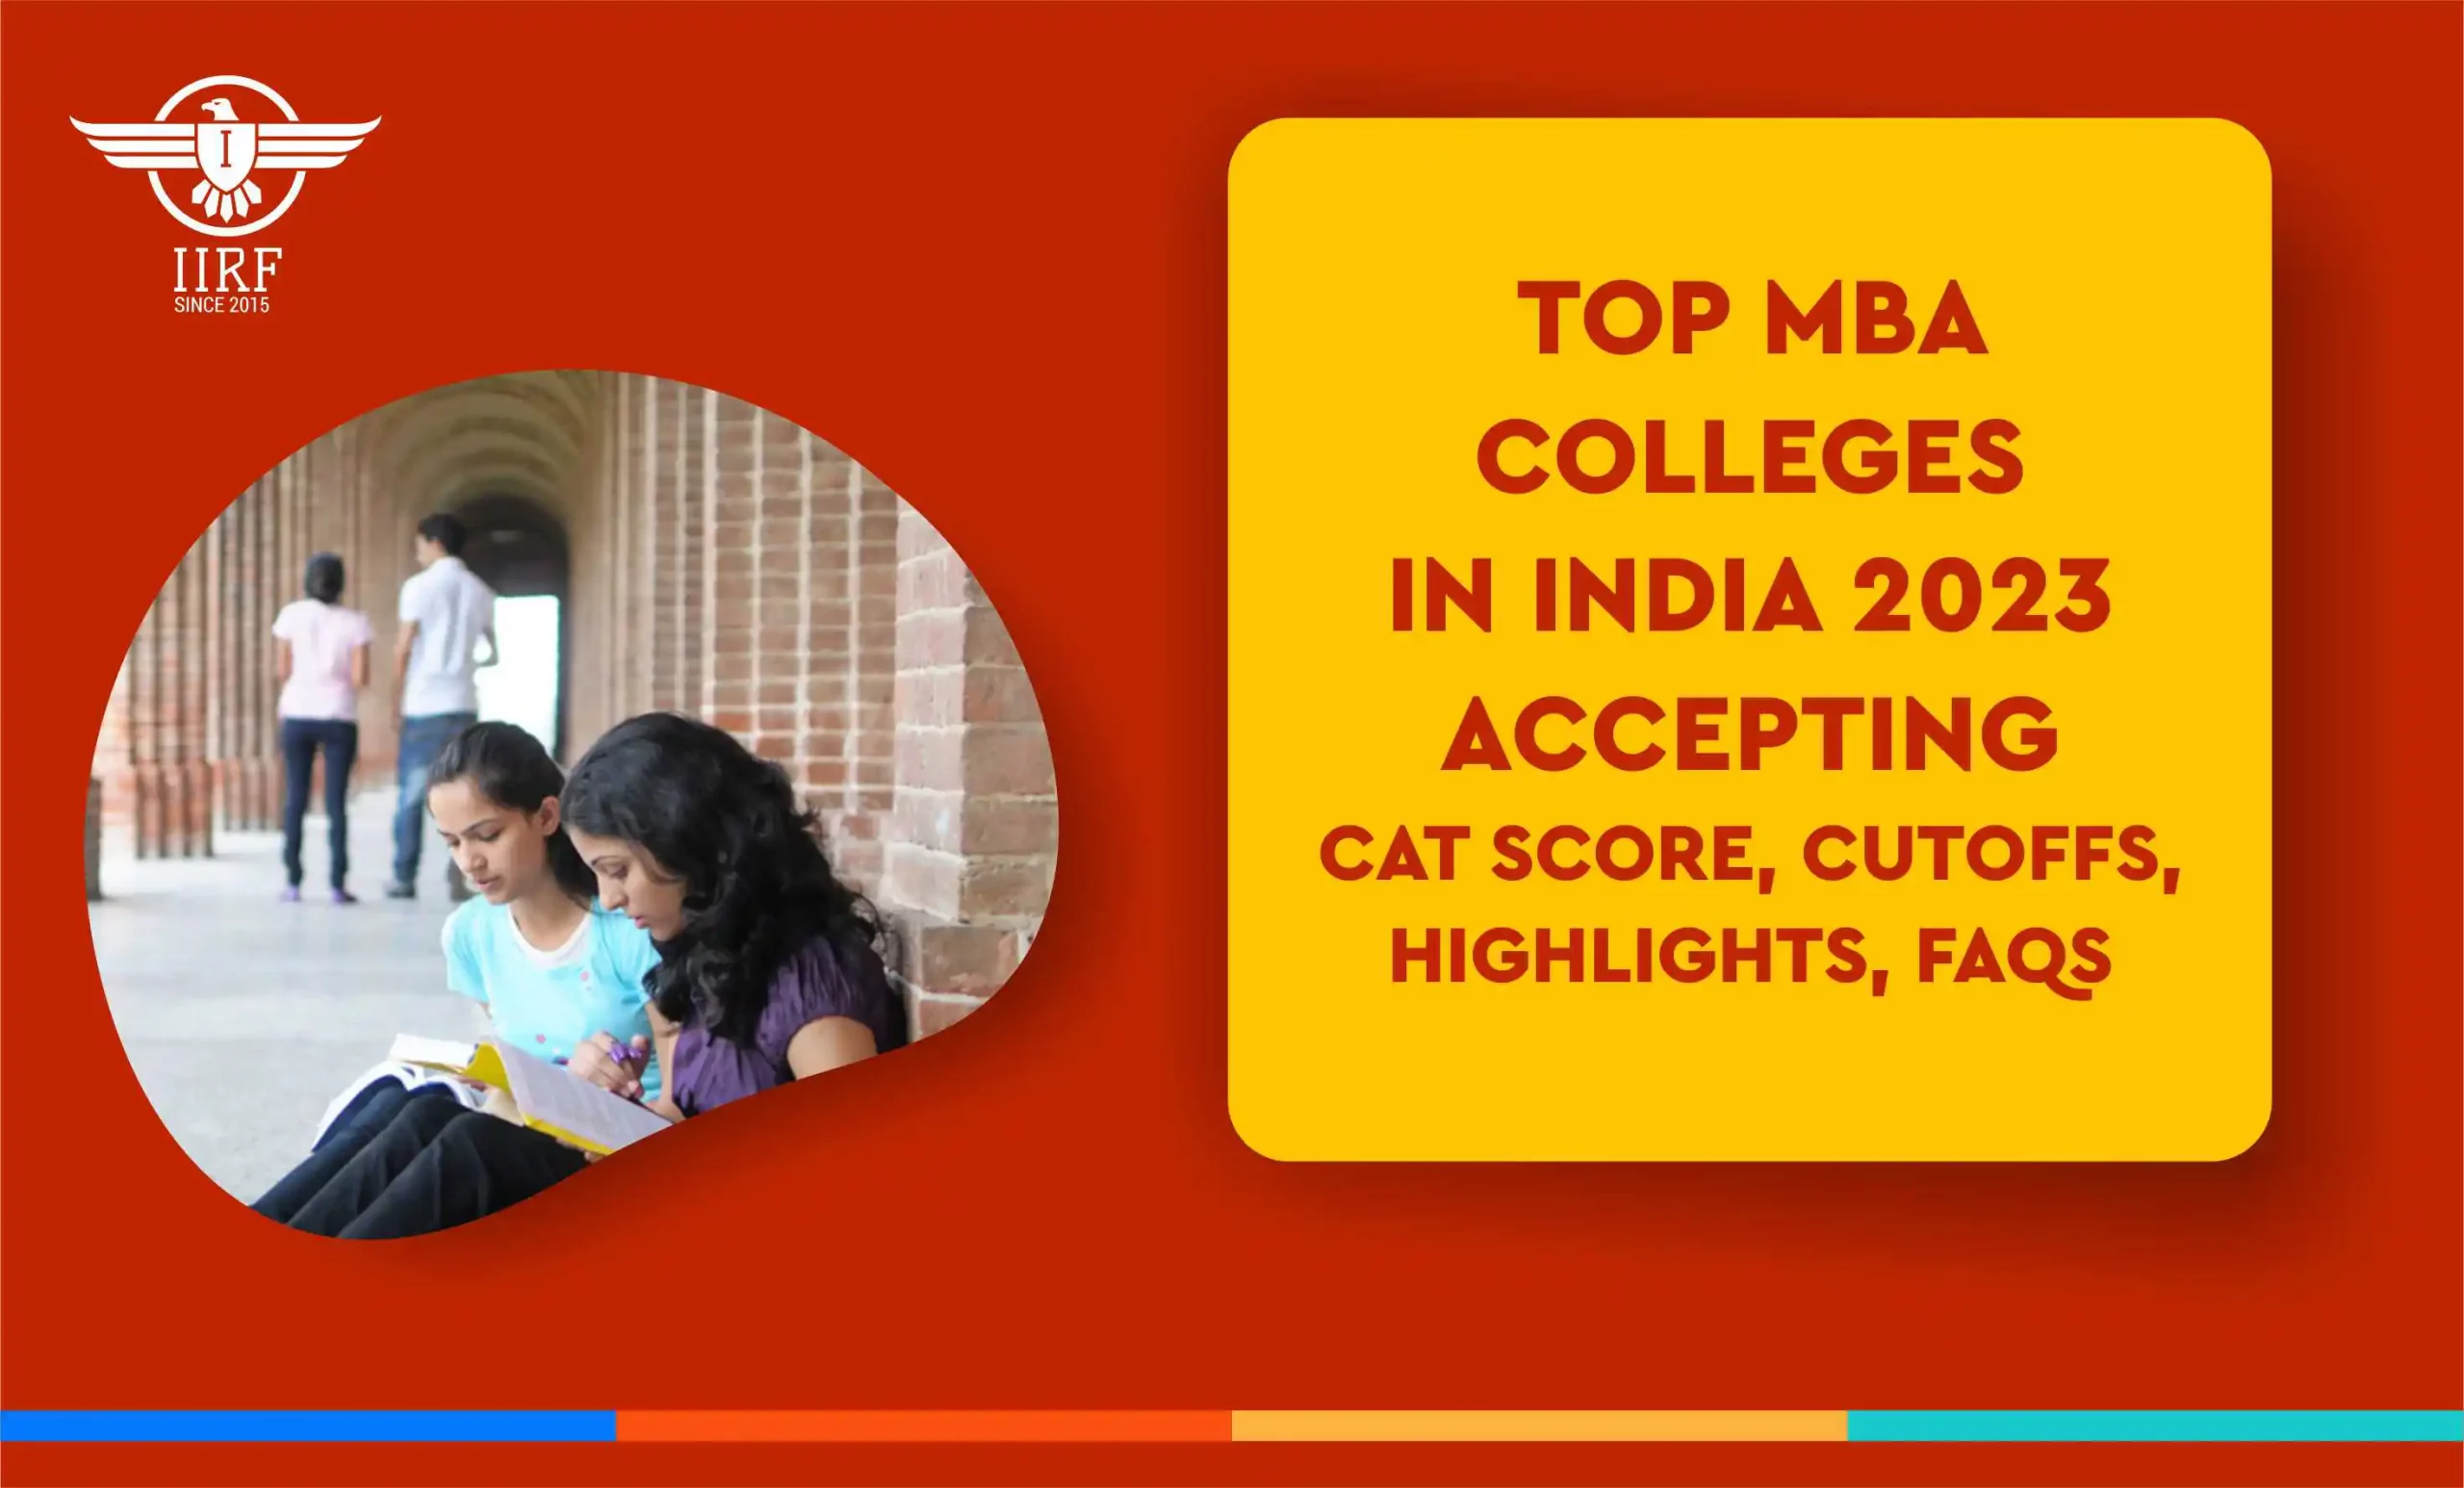 Top MBA Colleges in India 2023 Accepting CAT Score, Cutoffs, Highlights, FAQs &#8211; IIRF